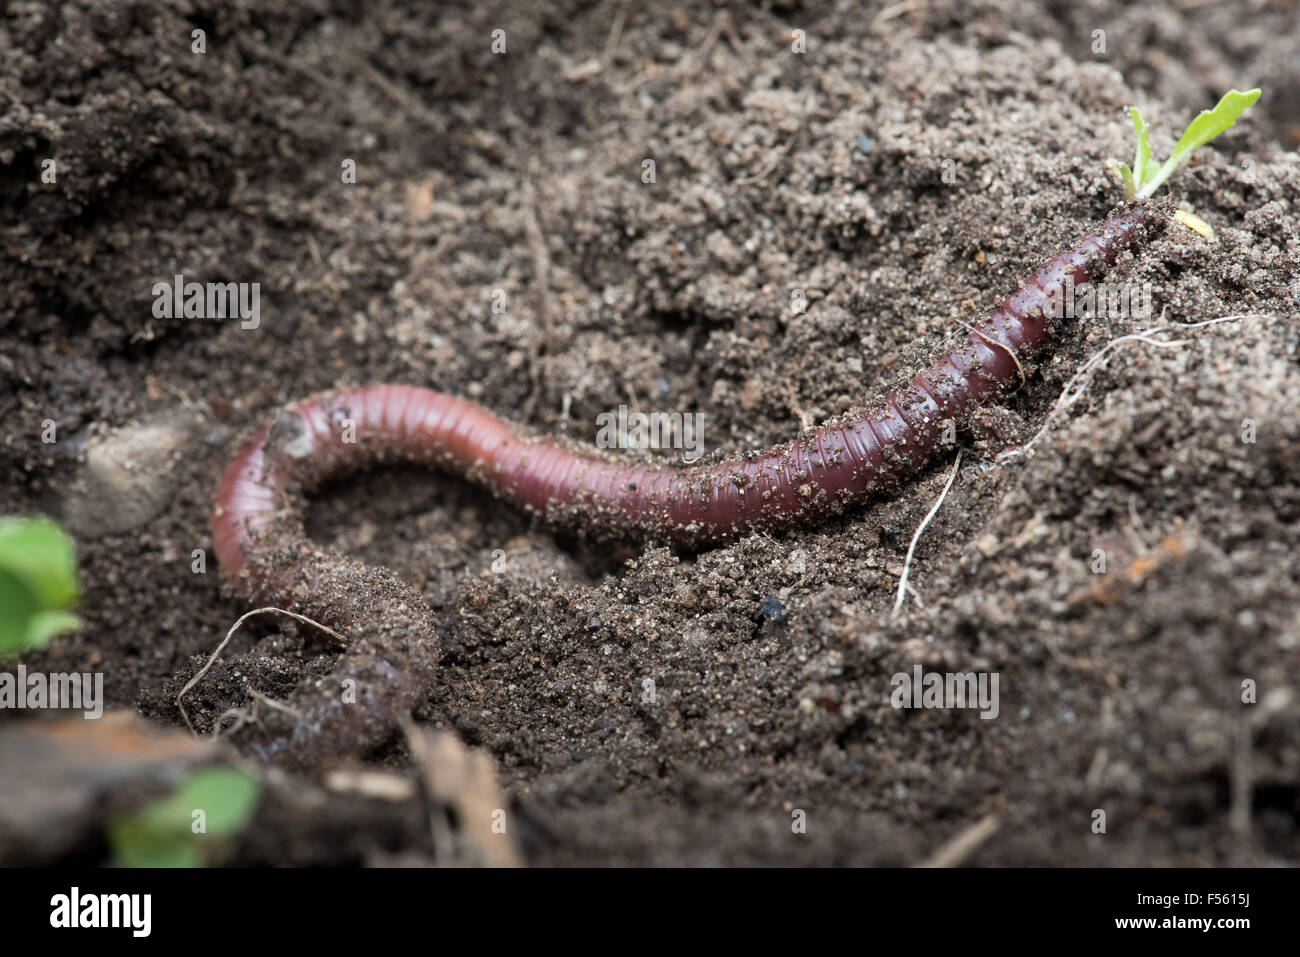 02.05.2015, Berlin, Berlin, Germany  - The earthworms (Lumbricidae) are living in the soil, articulated worms from the order of the oligochaeta (Oligochaeta). 00Y150502D001CAROEX.JPG - NOT for SALE in G E R M A N Y, A U S T R I A, S W I T Z E R L A N D [MODEL RELEASE: NOT APPLICABLE, PROPERTY RELEASE: NO (c) caro photo agency / Teich, http://www.caro-images.pl, info@carofoto.pl - In case of using the picture for non-journalistic purposes, please contact the agency - the picture is subject to royalty!] Stock Photo